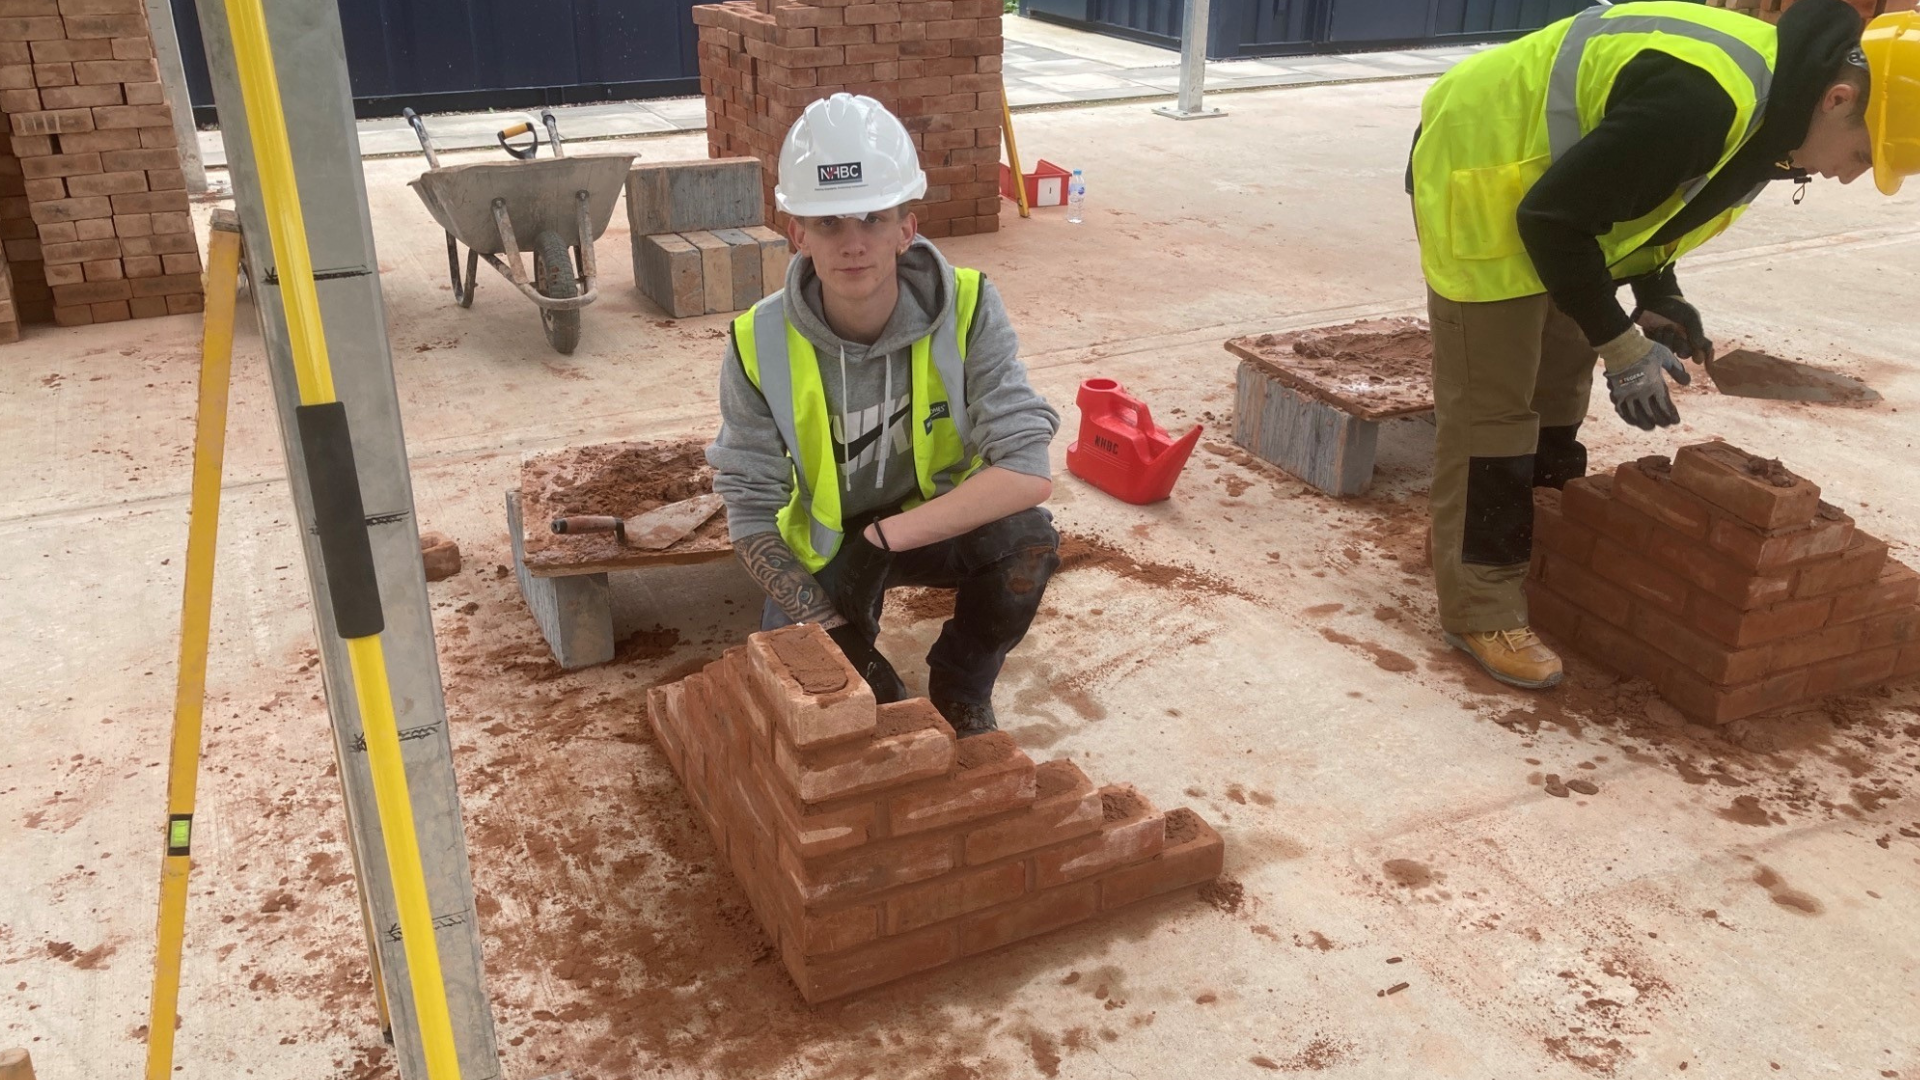 a photo of a young man in site safety clothing kneeling by some brickwork